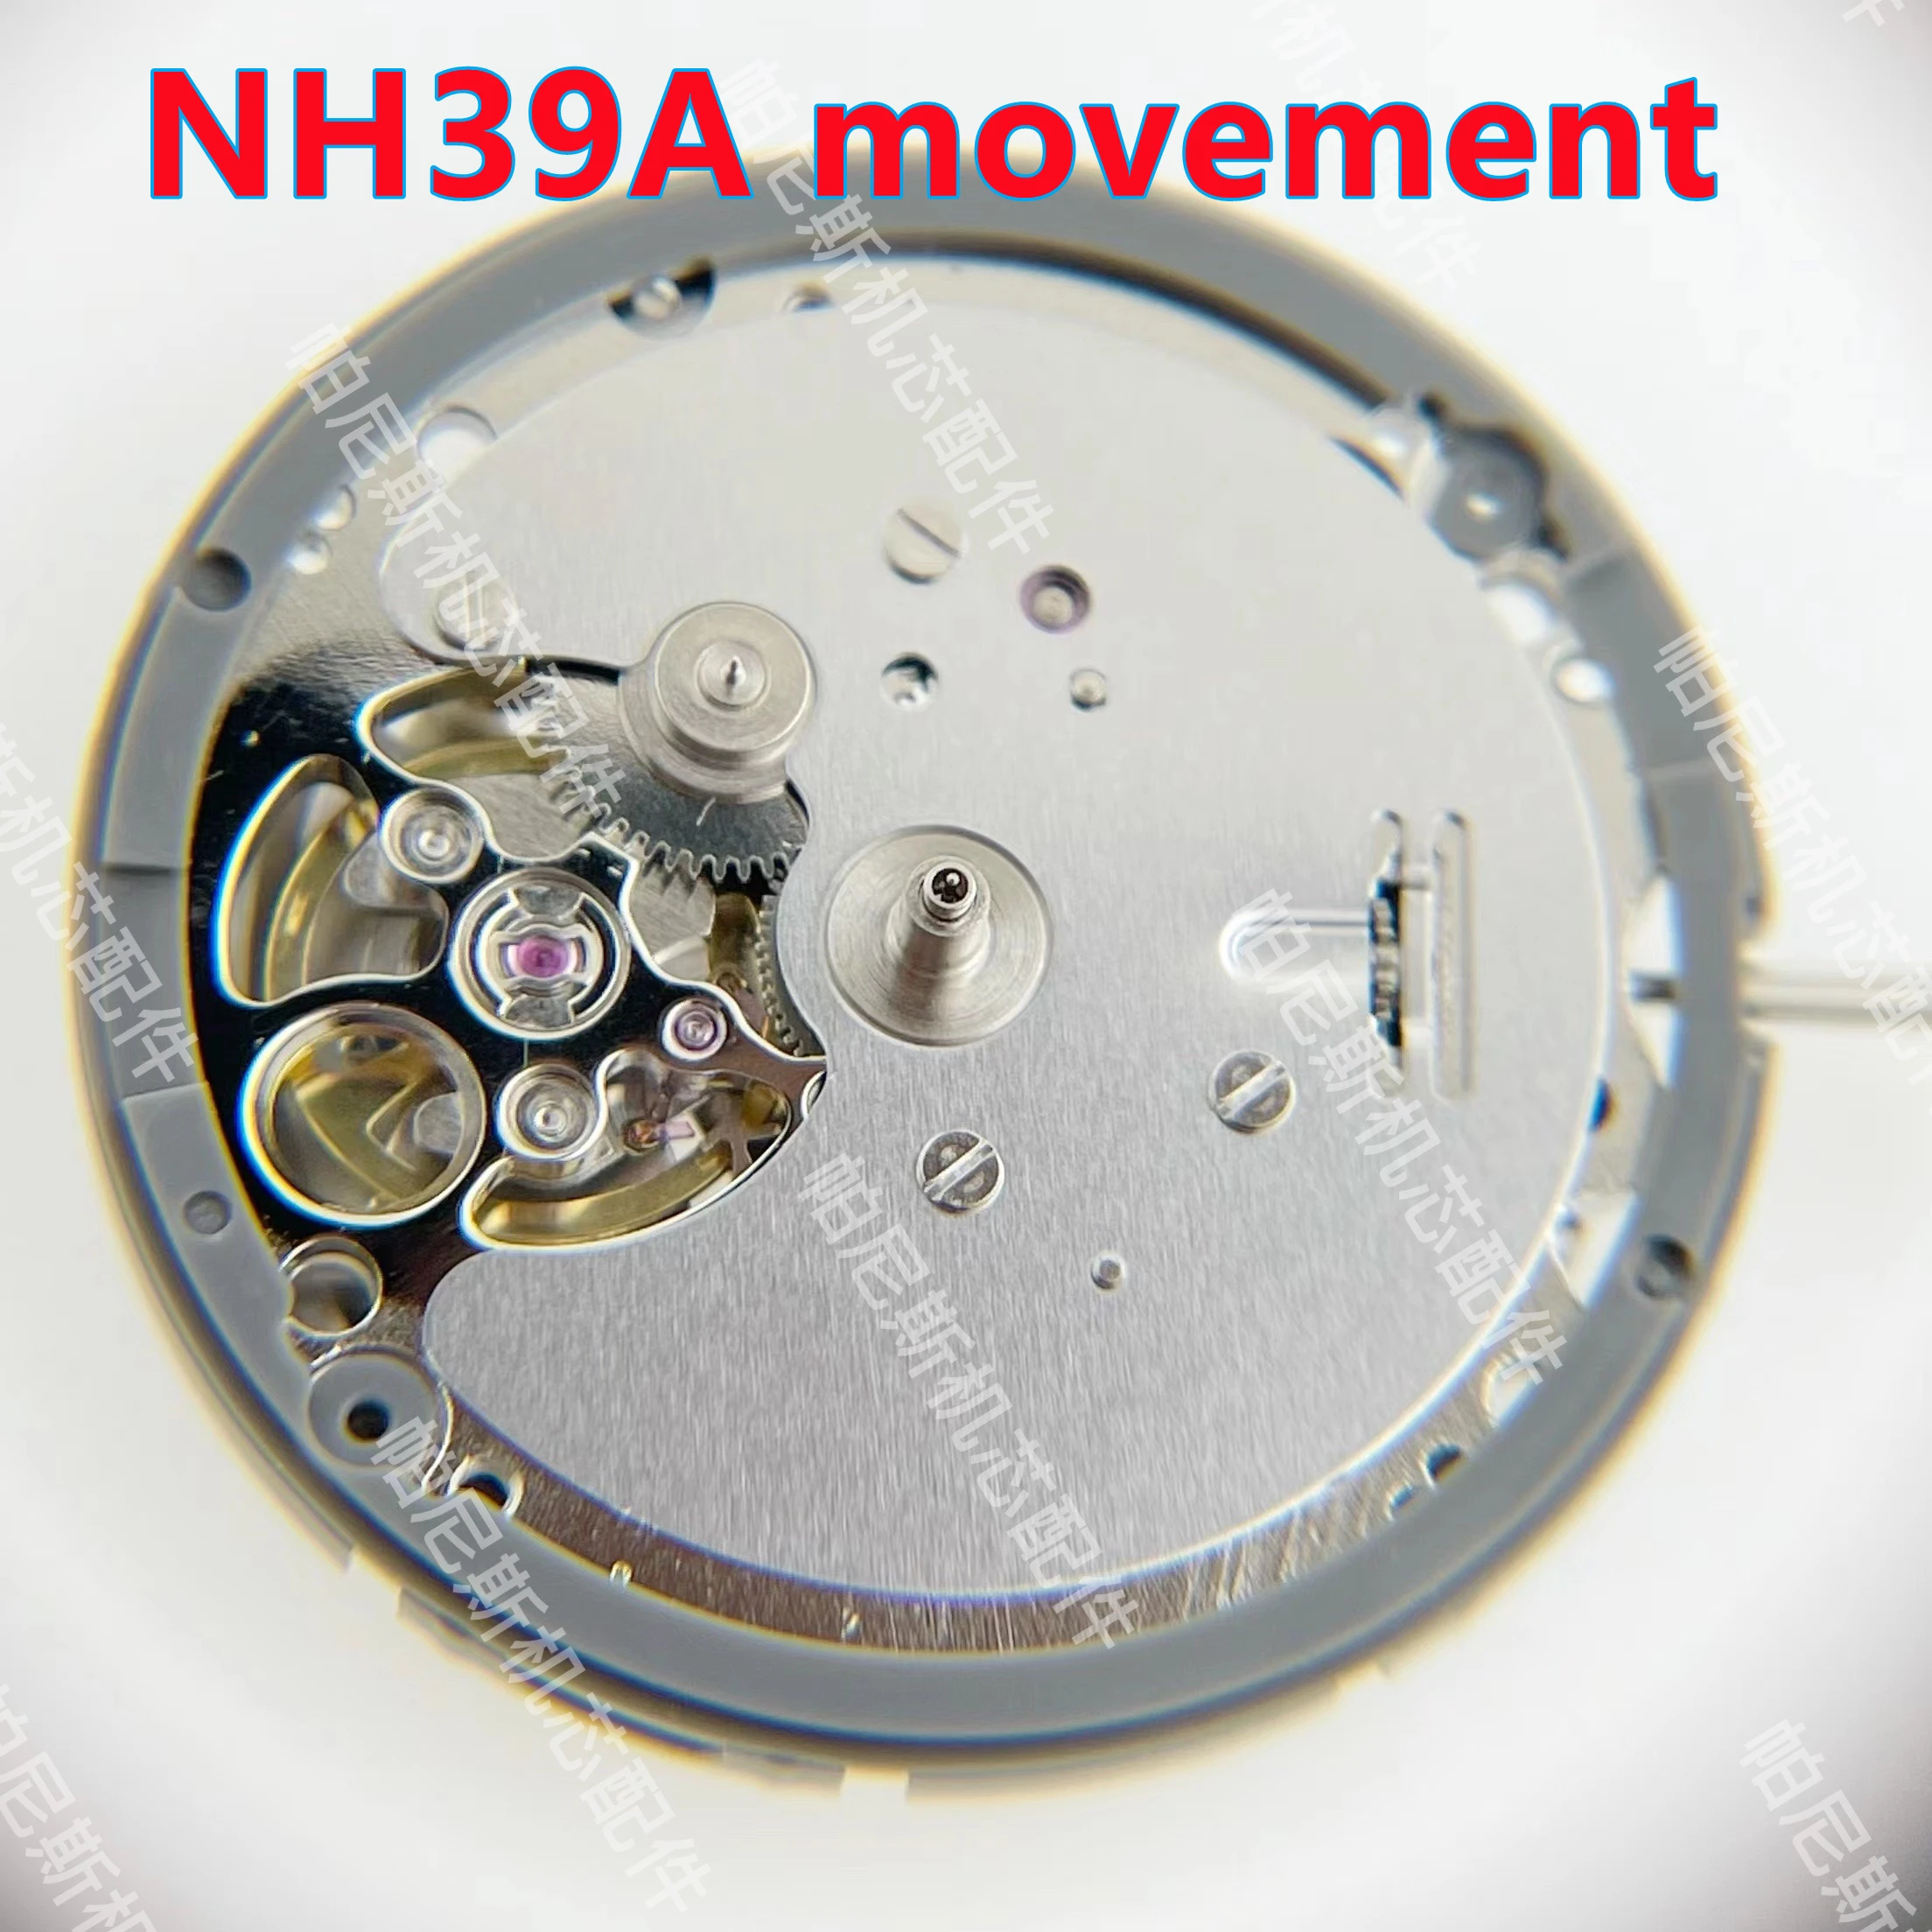 

Watch parts Standard Mechanical Movement NH39 Upgrade Japan Movt Top Quality Automatic Watch Replace Movement NH39A